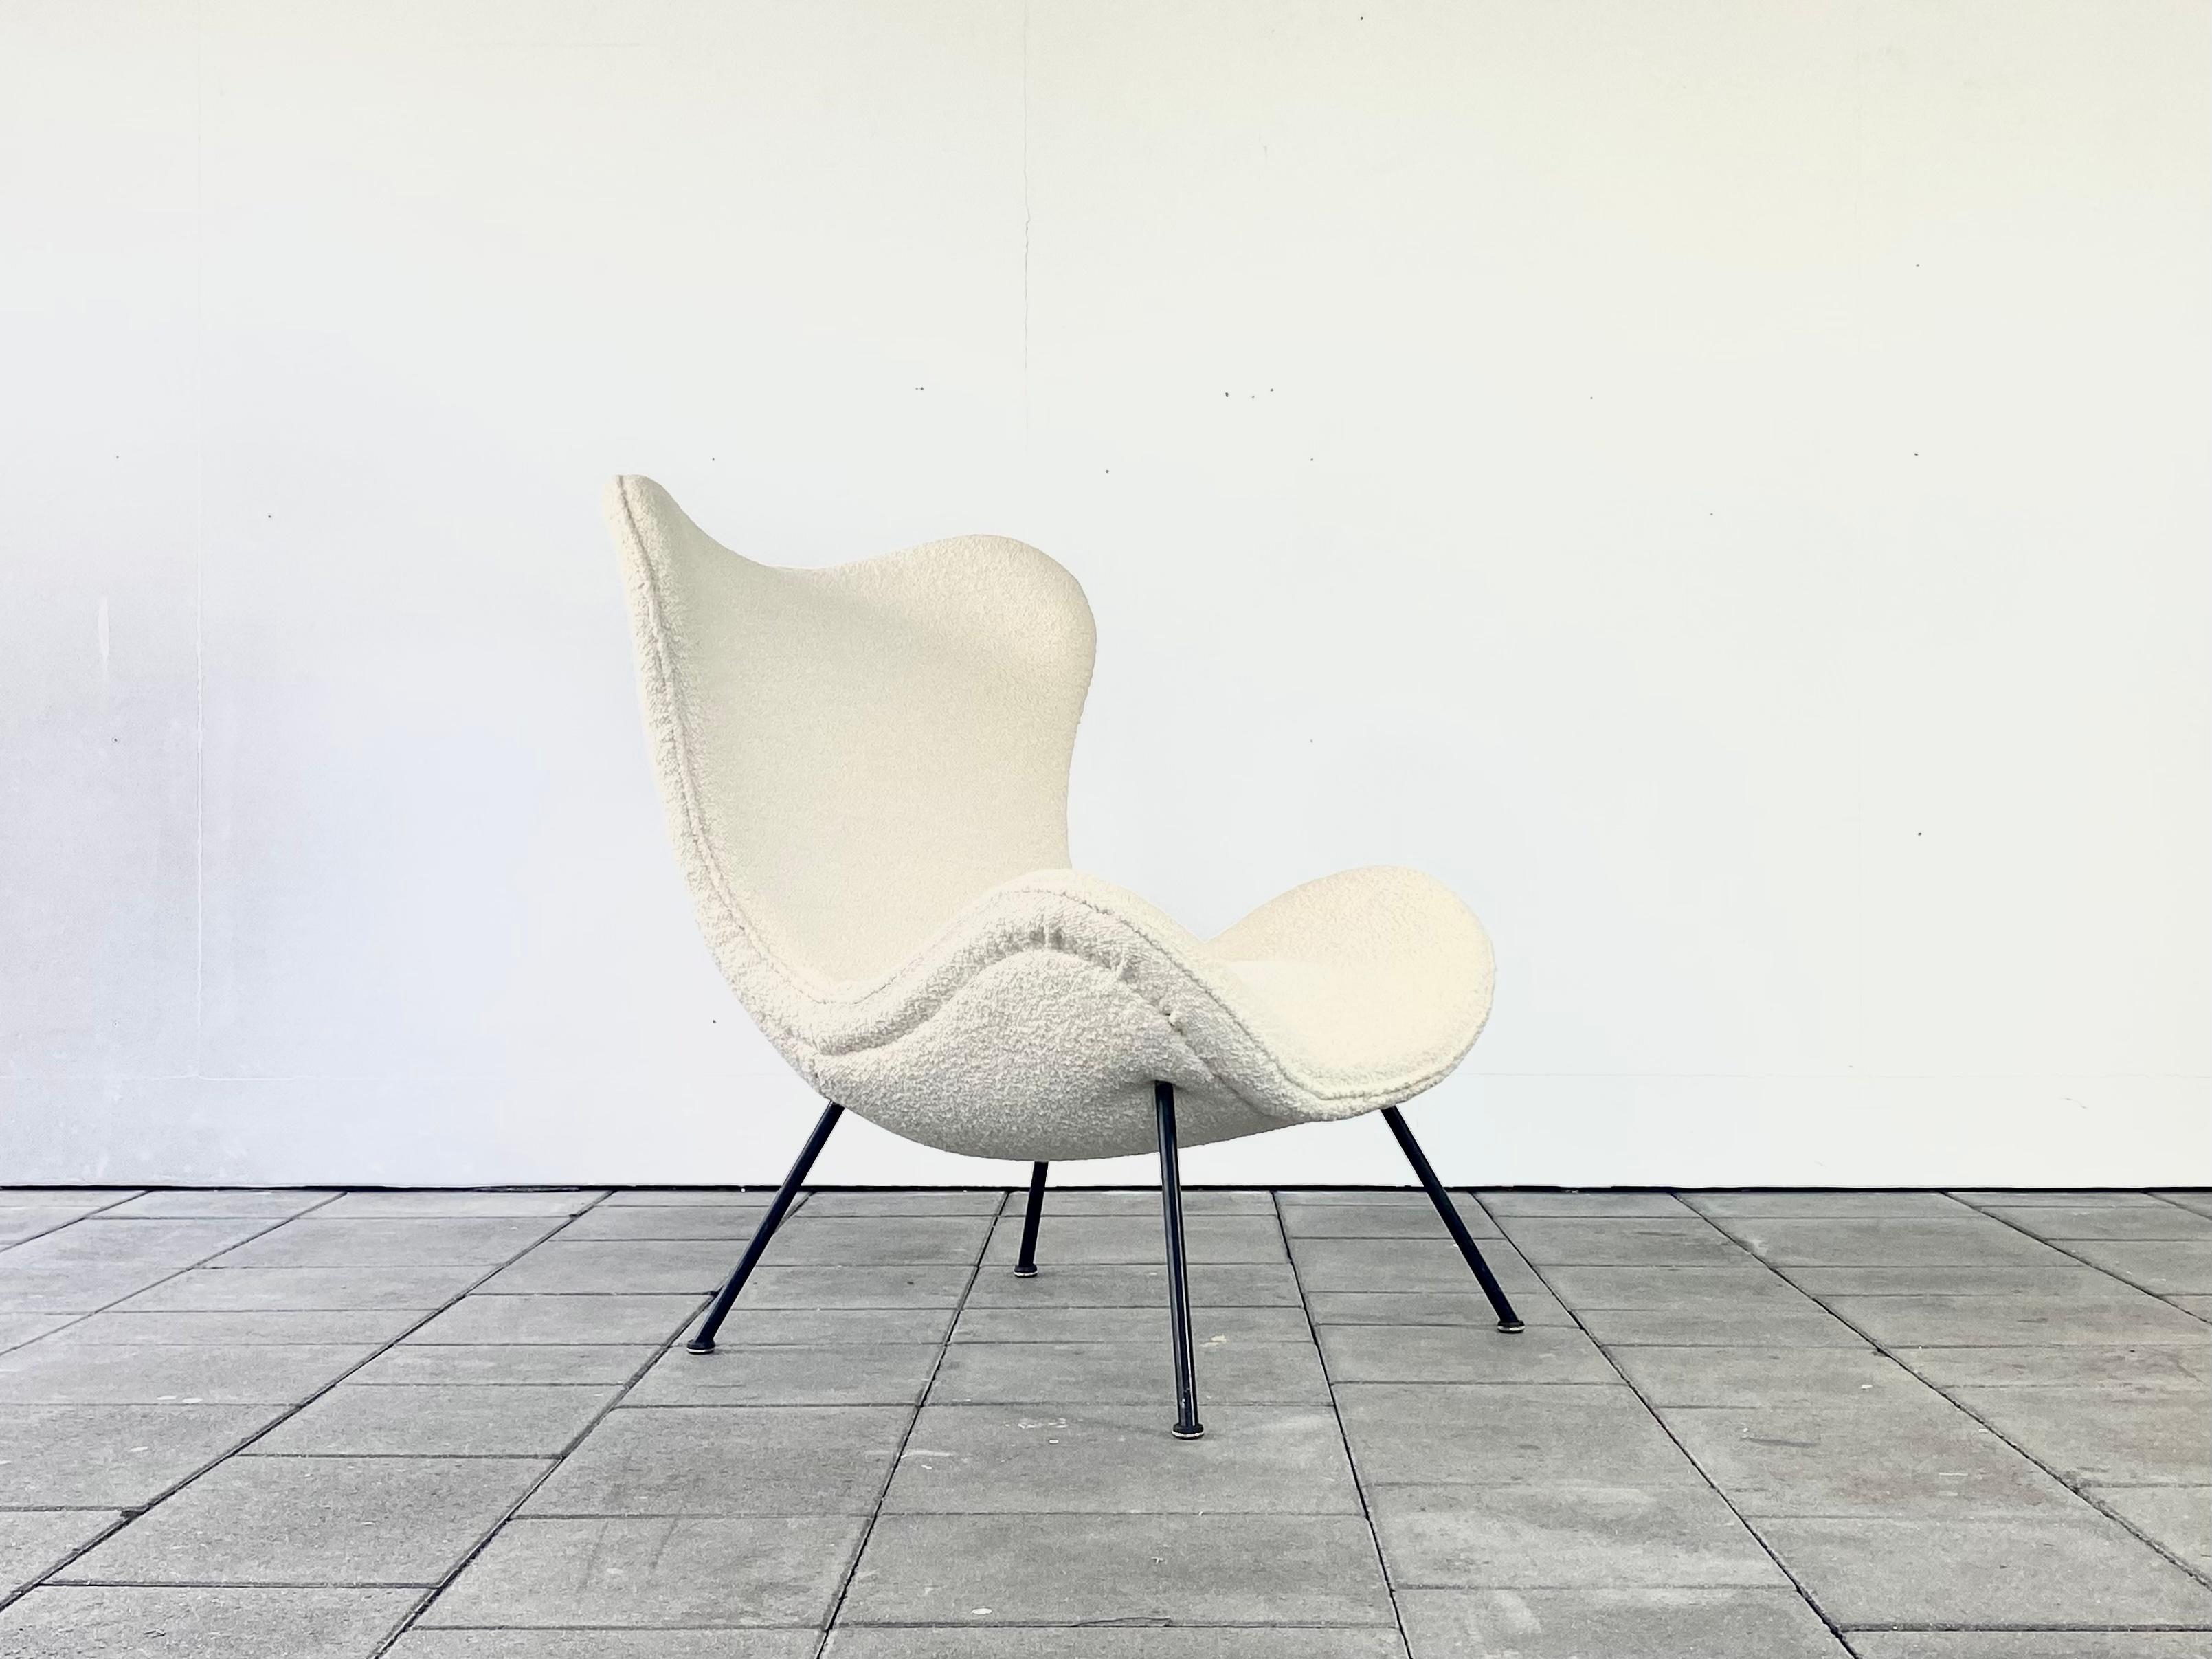 Organic 1950ies Madame lounge chair in Boucle designed by Fritz Neth 1955

Extraordinary high back Lounge chair, designed by Fritz Neth for Correcta in 1955. Reupholstered in high-quality off-white Boucle‘ fabric.

With it’s beautiful organic